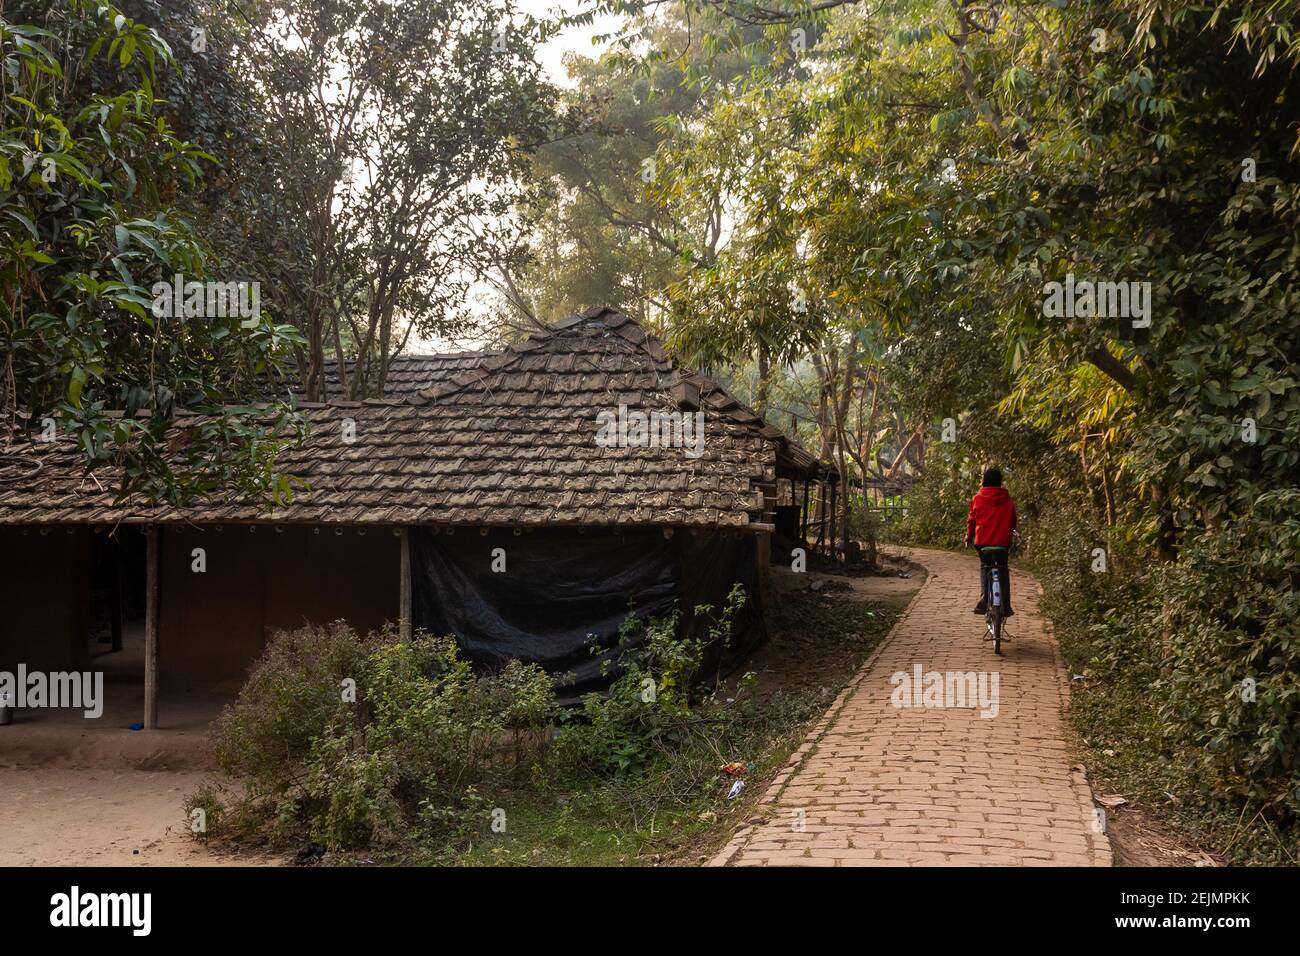 Malda, West Bengal, India - January 2018: A narrow lane going past a thatched roof hut in the village of Pandua in Malda. Stock Photo